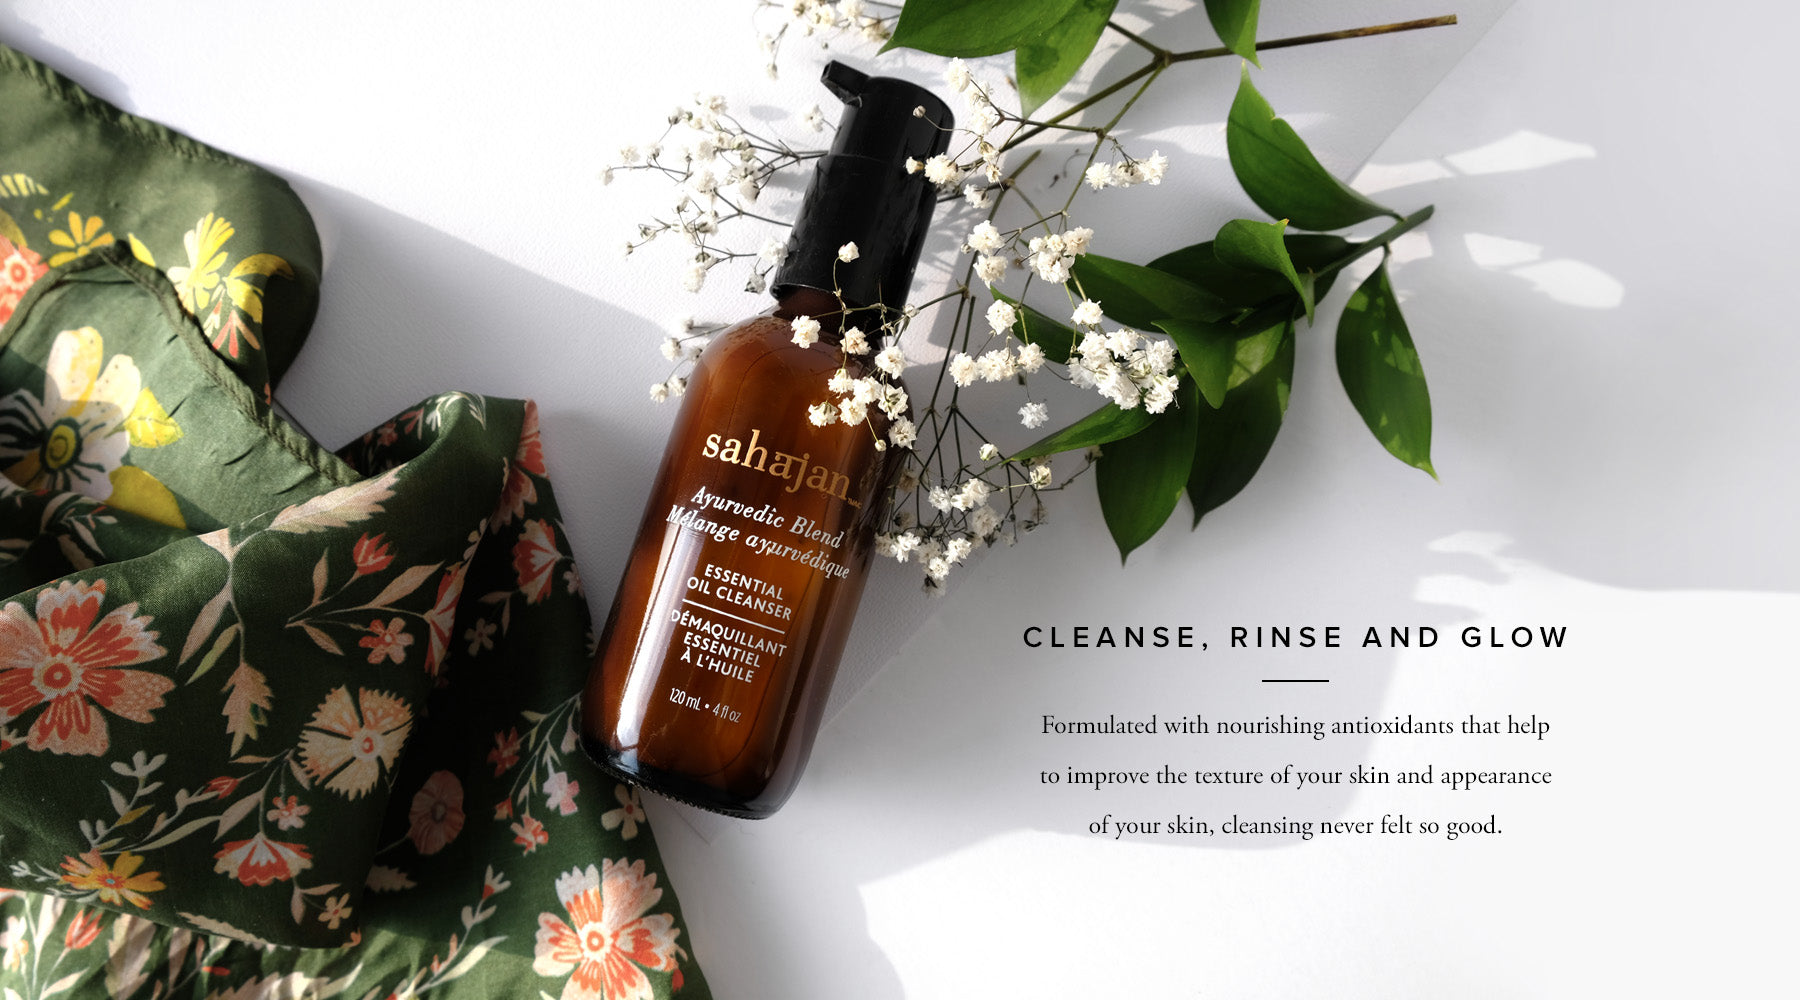 Cleanse, Rinse and Glow  Formulated with nourishing antioxidants that help to improve the texture and appearance of your skin, cleansing never felt so good.